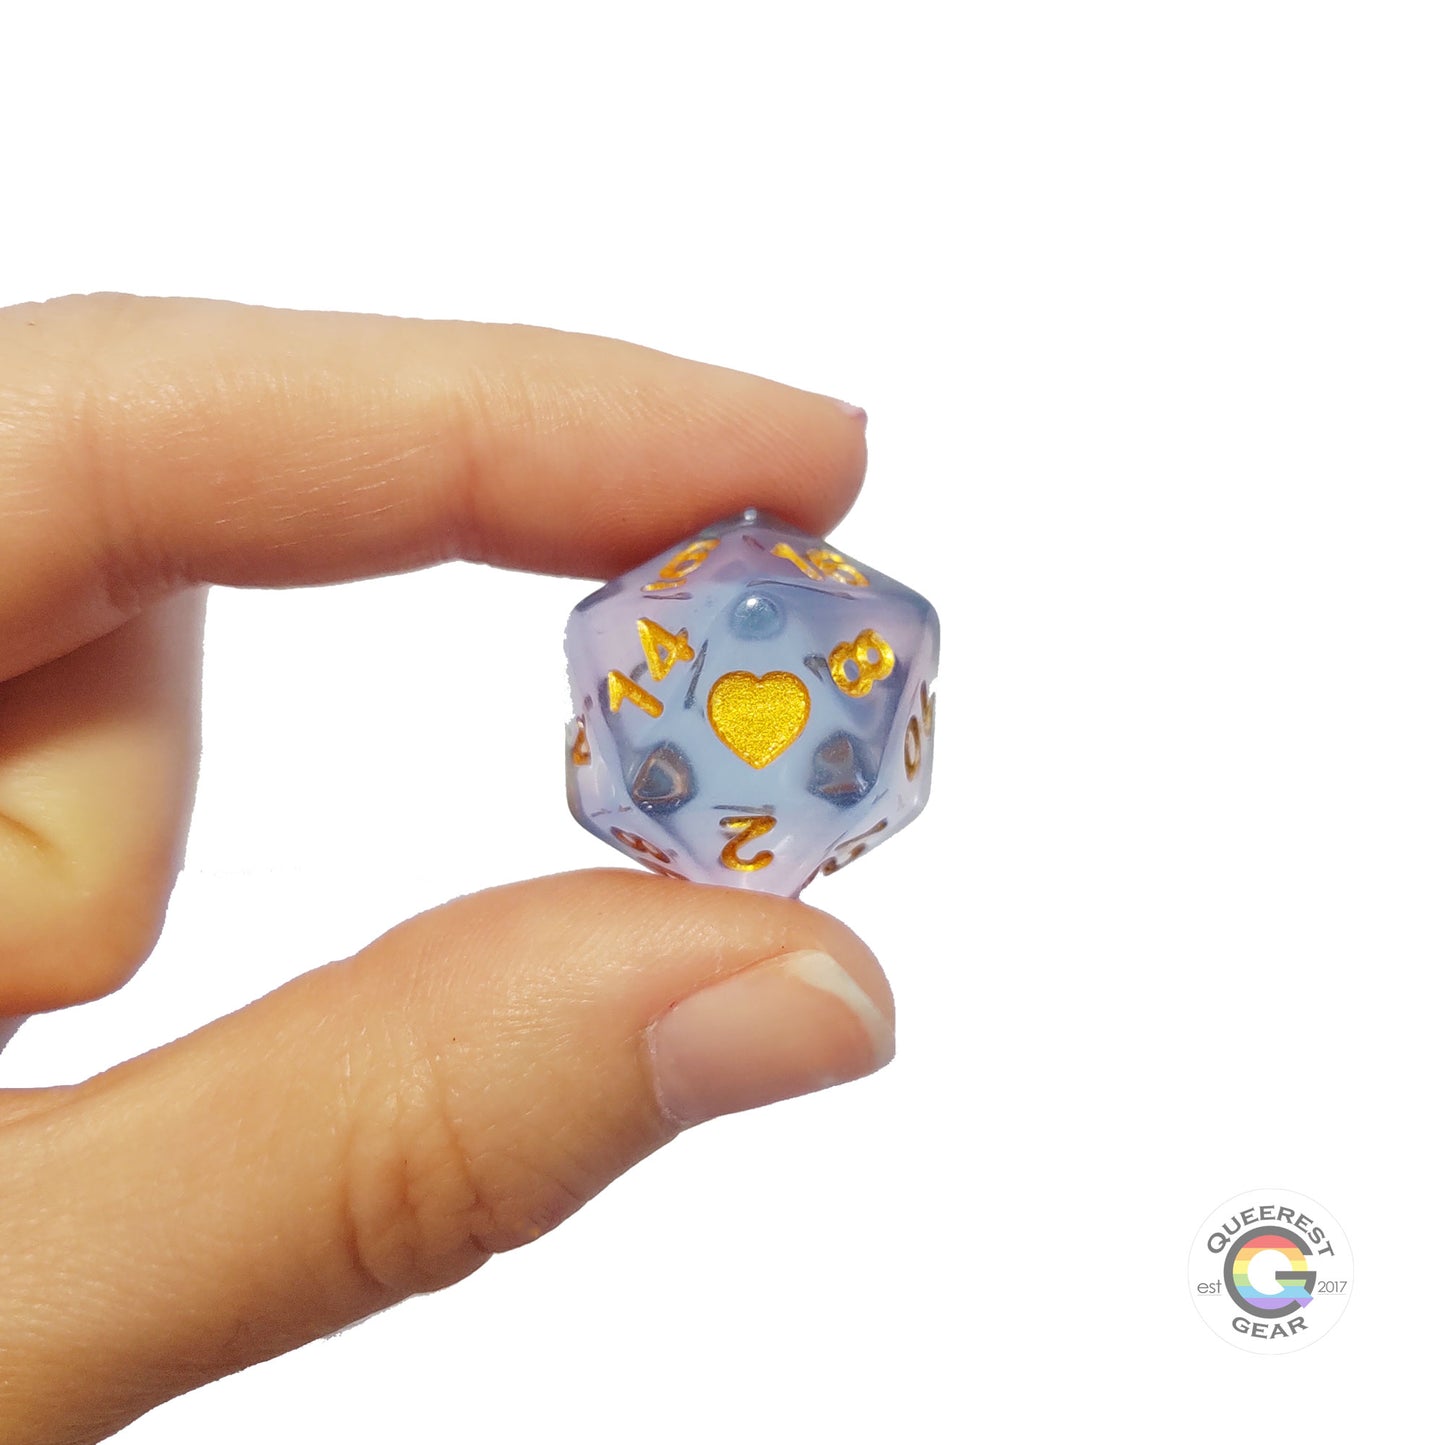 A hand holding up the transgender d20 to show off the color, heart, and transparency